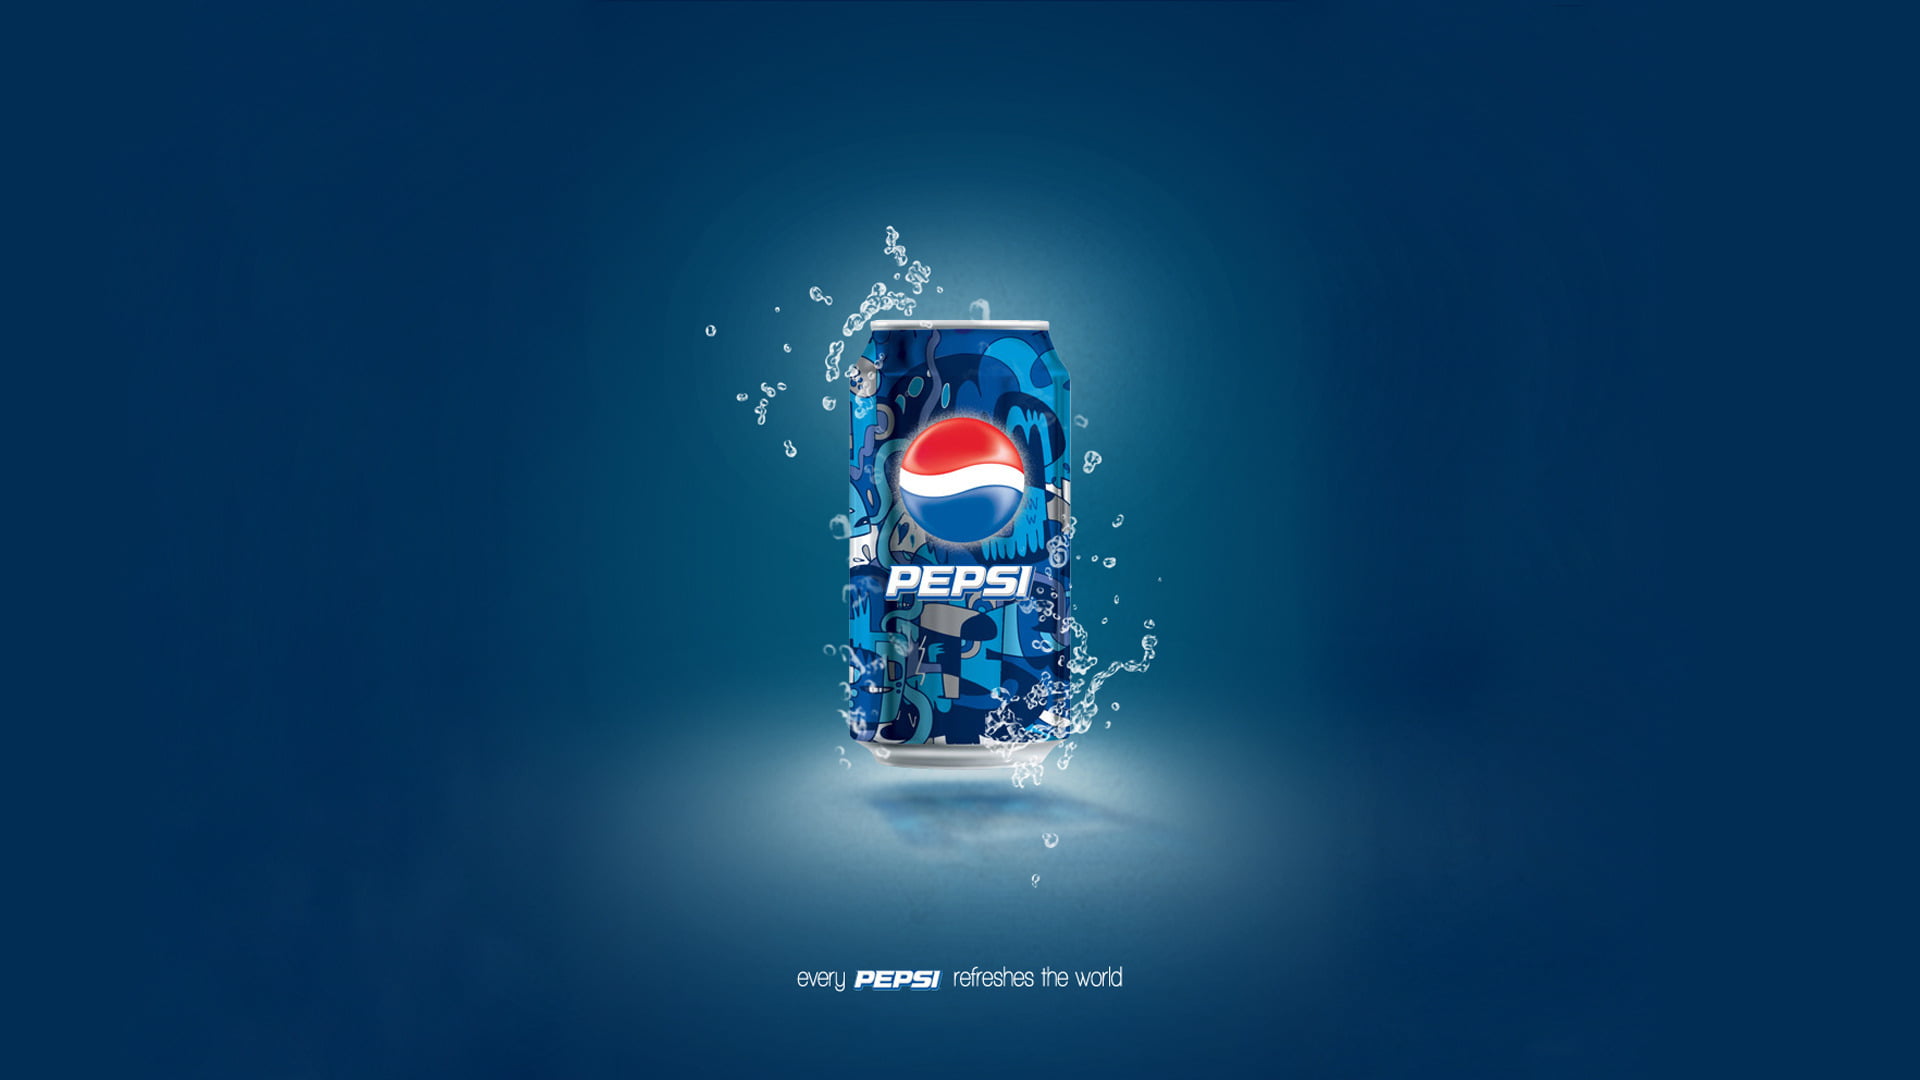 Pepsi tin can advertisement, drops, blue, background, Bank, red